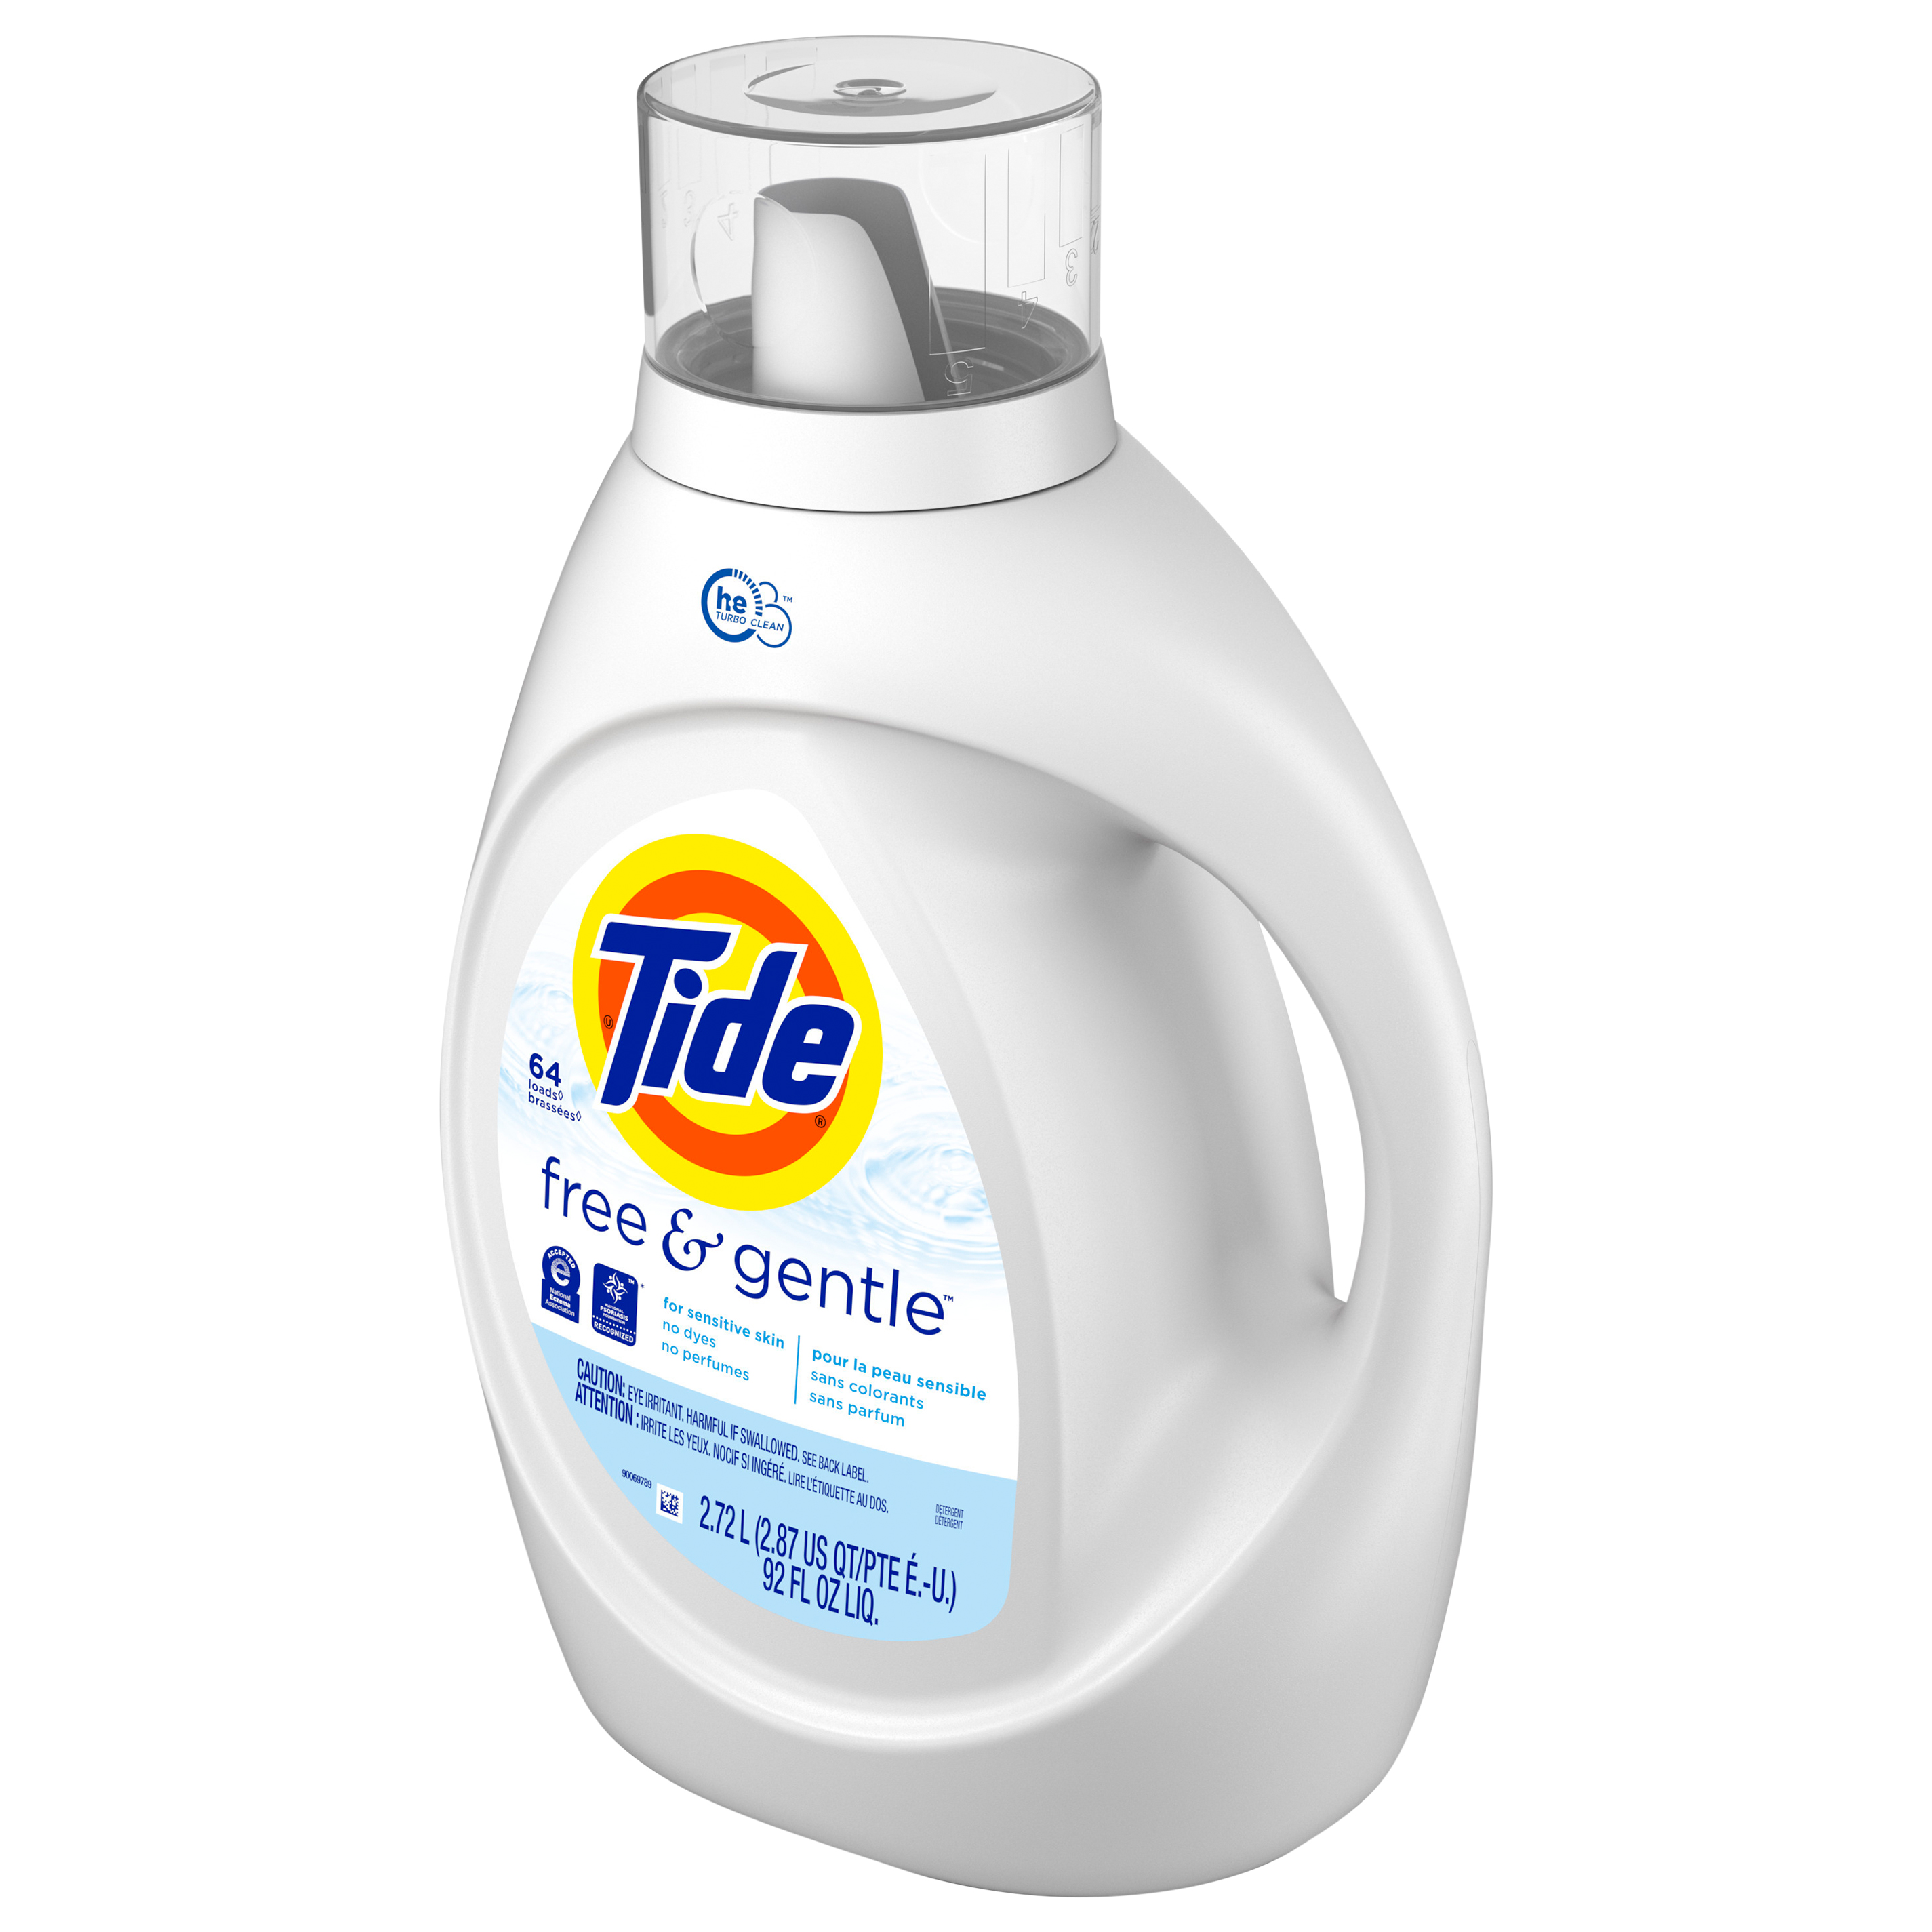 Tide HE Turbo Clean Frequently Asked Questions